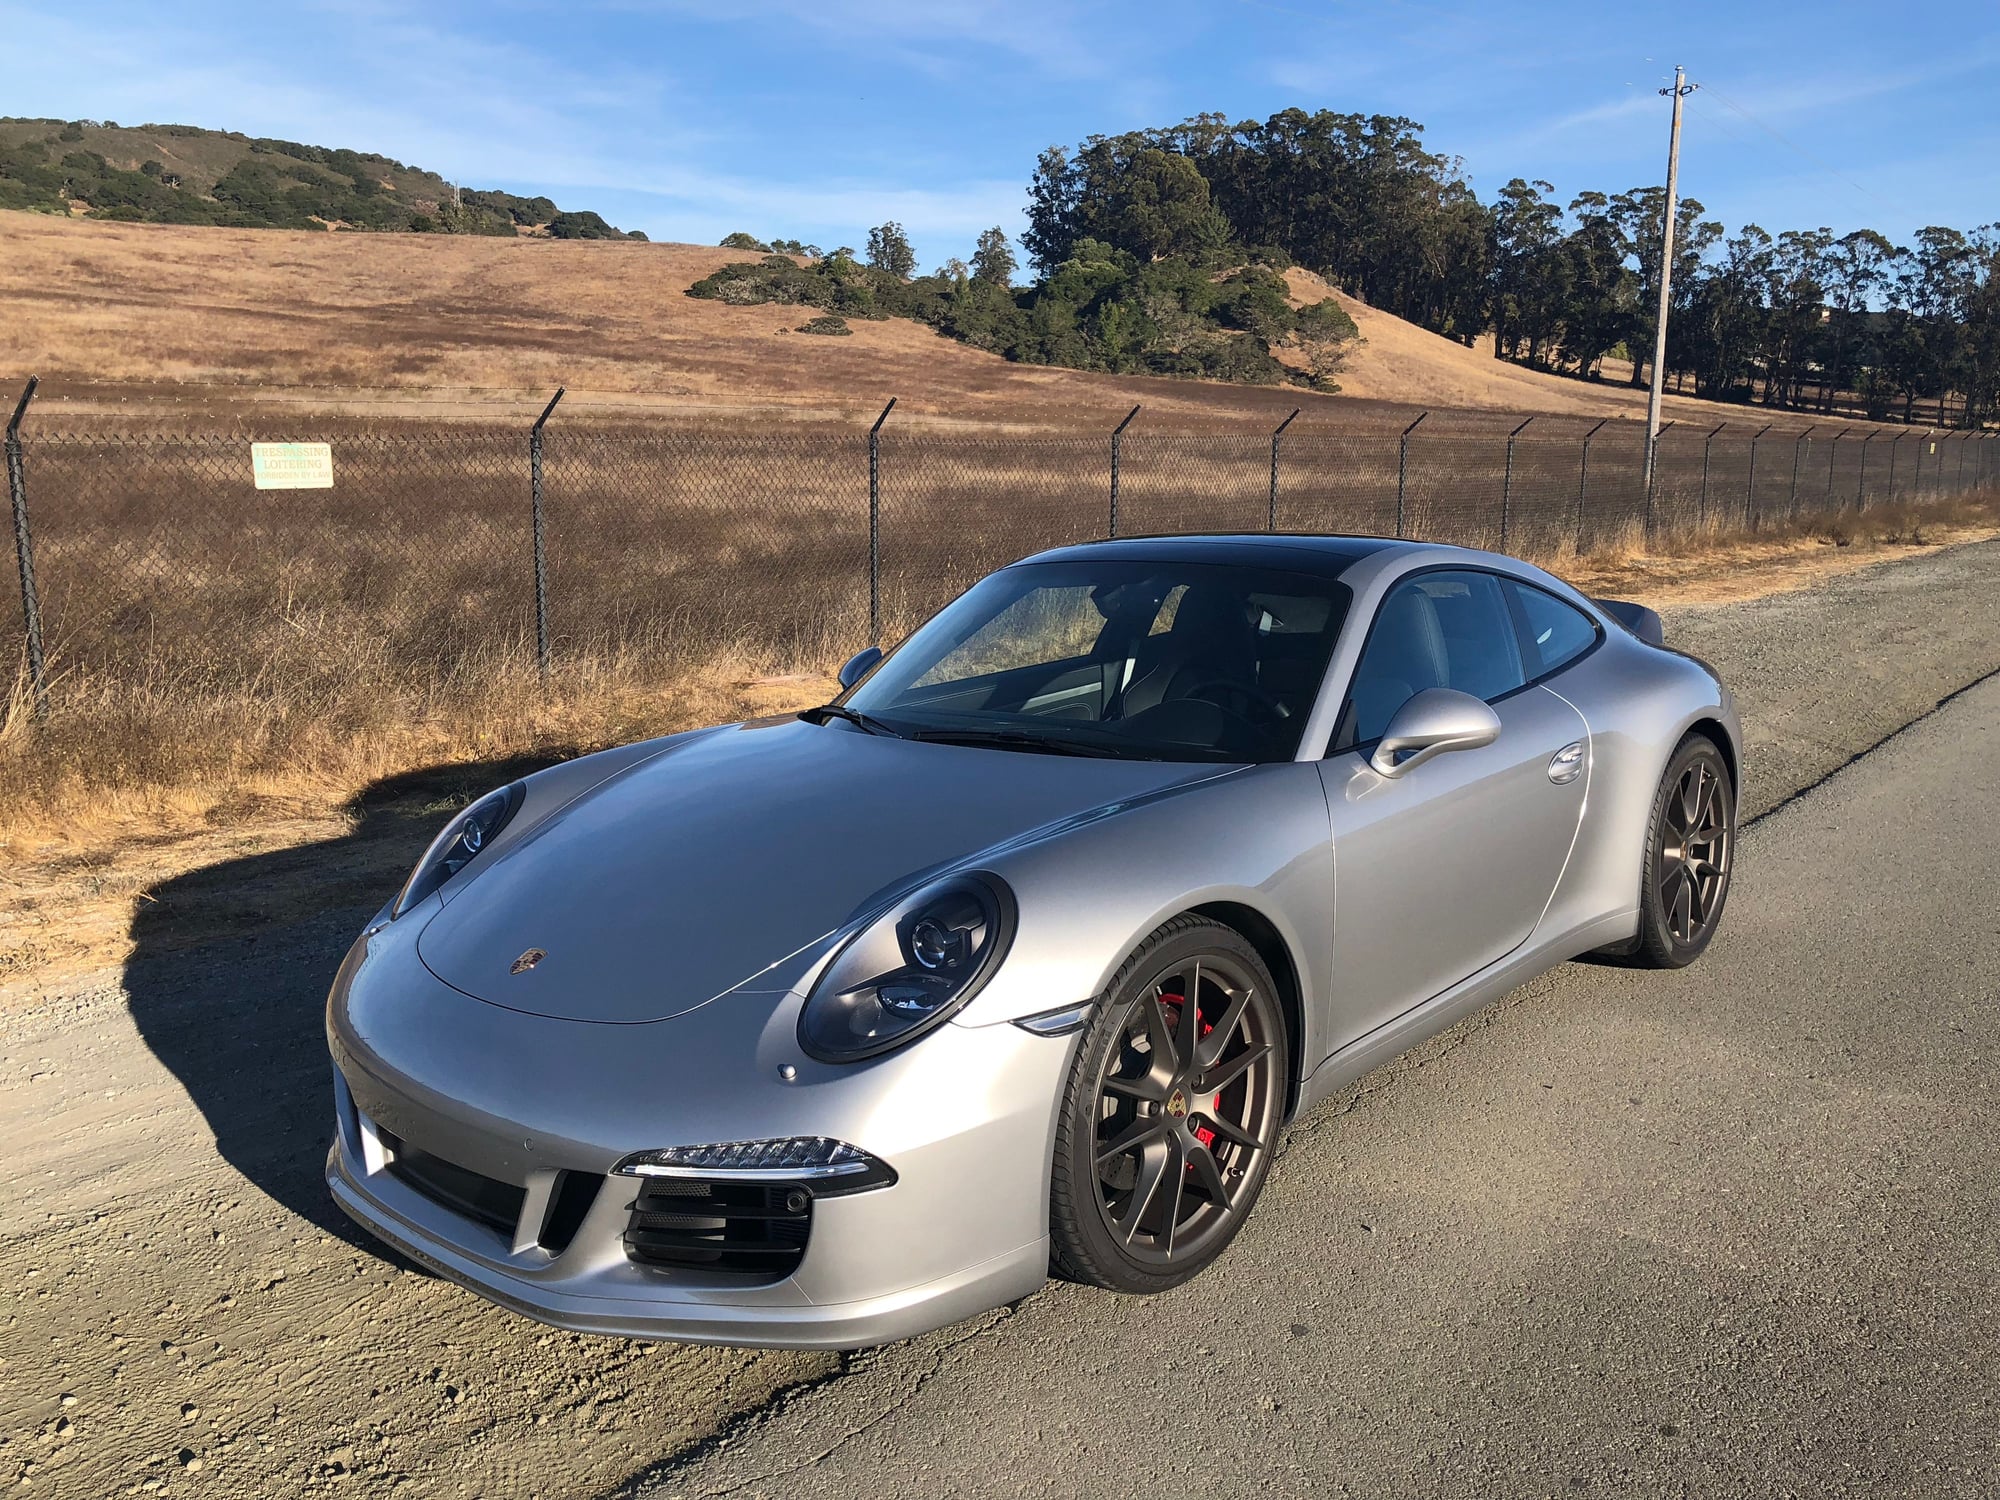 2015 Porsche 911 - 2015 PORSCHE 911 S (MANUAL) WITH SPORT DESIGN PACKAGE - Used - VIN WP0AB2A93FS124168 - 6 cyl - 2WD - Manual - Coupe - Silver - Palo Alto, CA 94301, United States